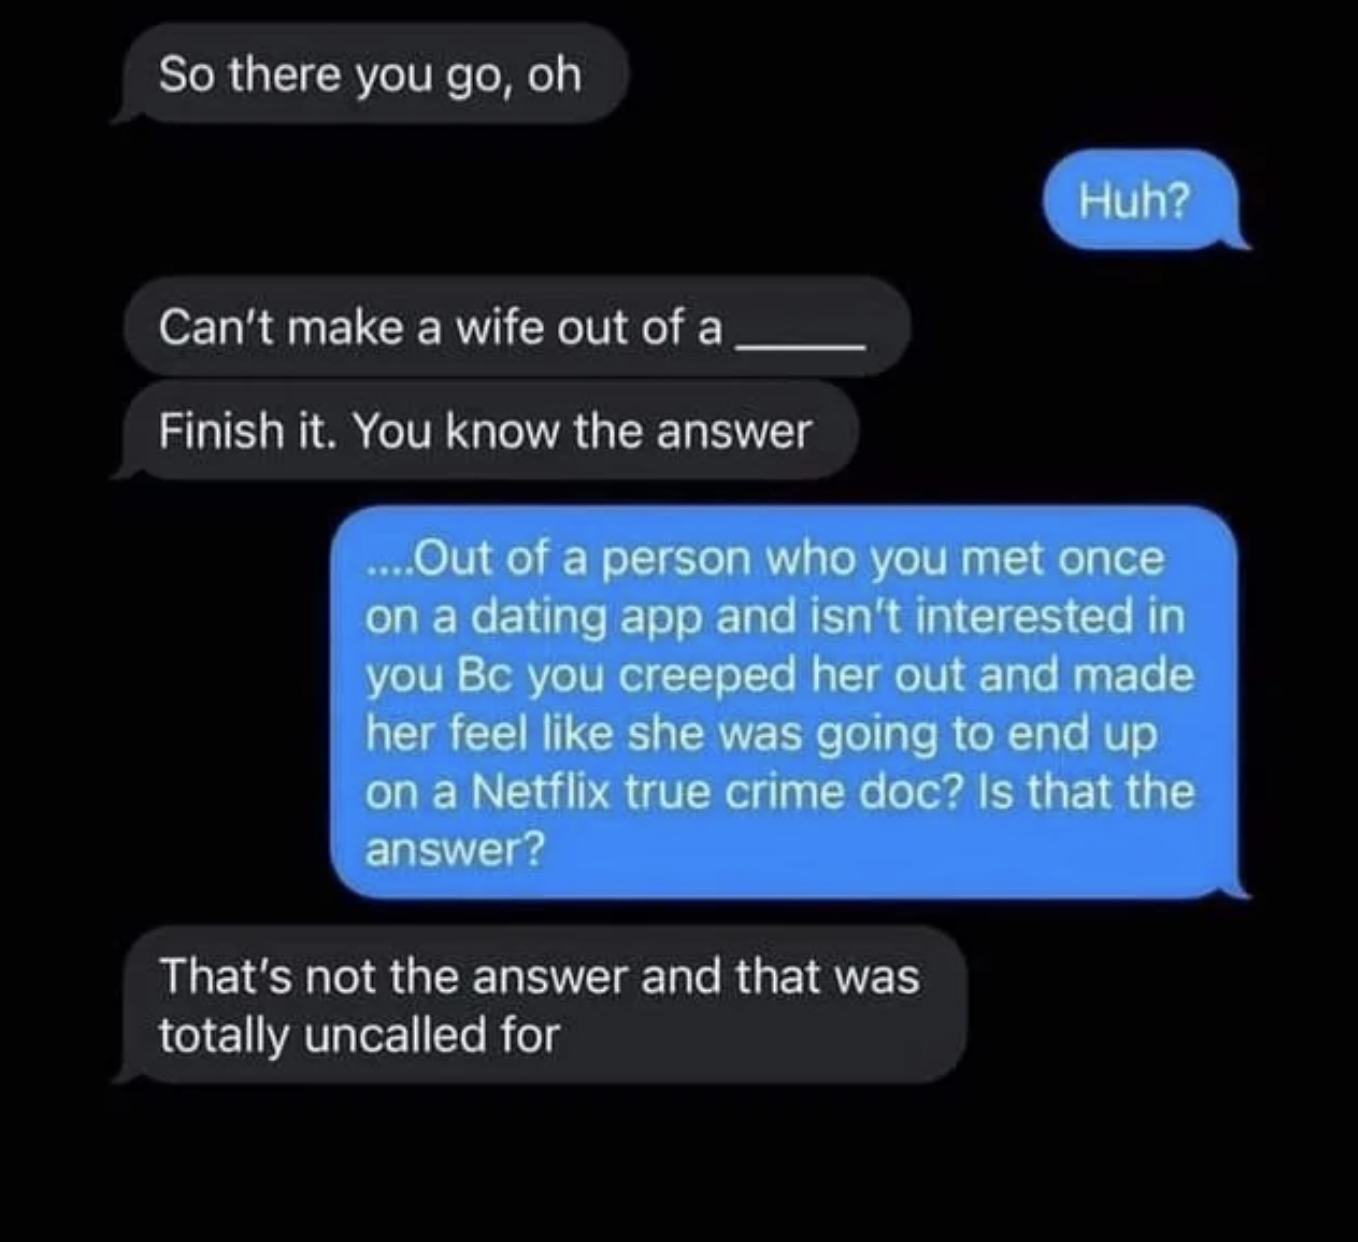 Cursed Comments - So there you go, oh Can't make a wife out of a Finish it. You know the answer Huh? ....Out of a person who you met once on a dating app and isn't interested in you Bc you creeped her out and made her feel she was going to end up on a Net